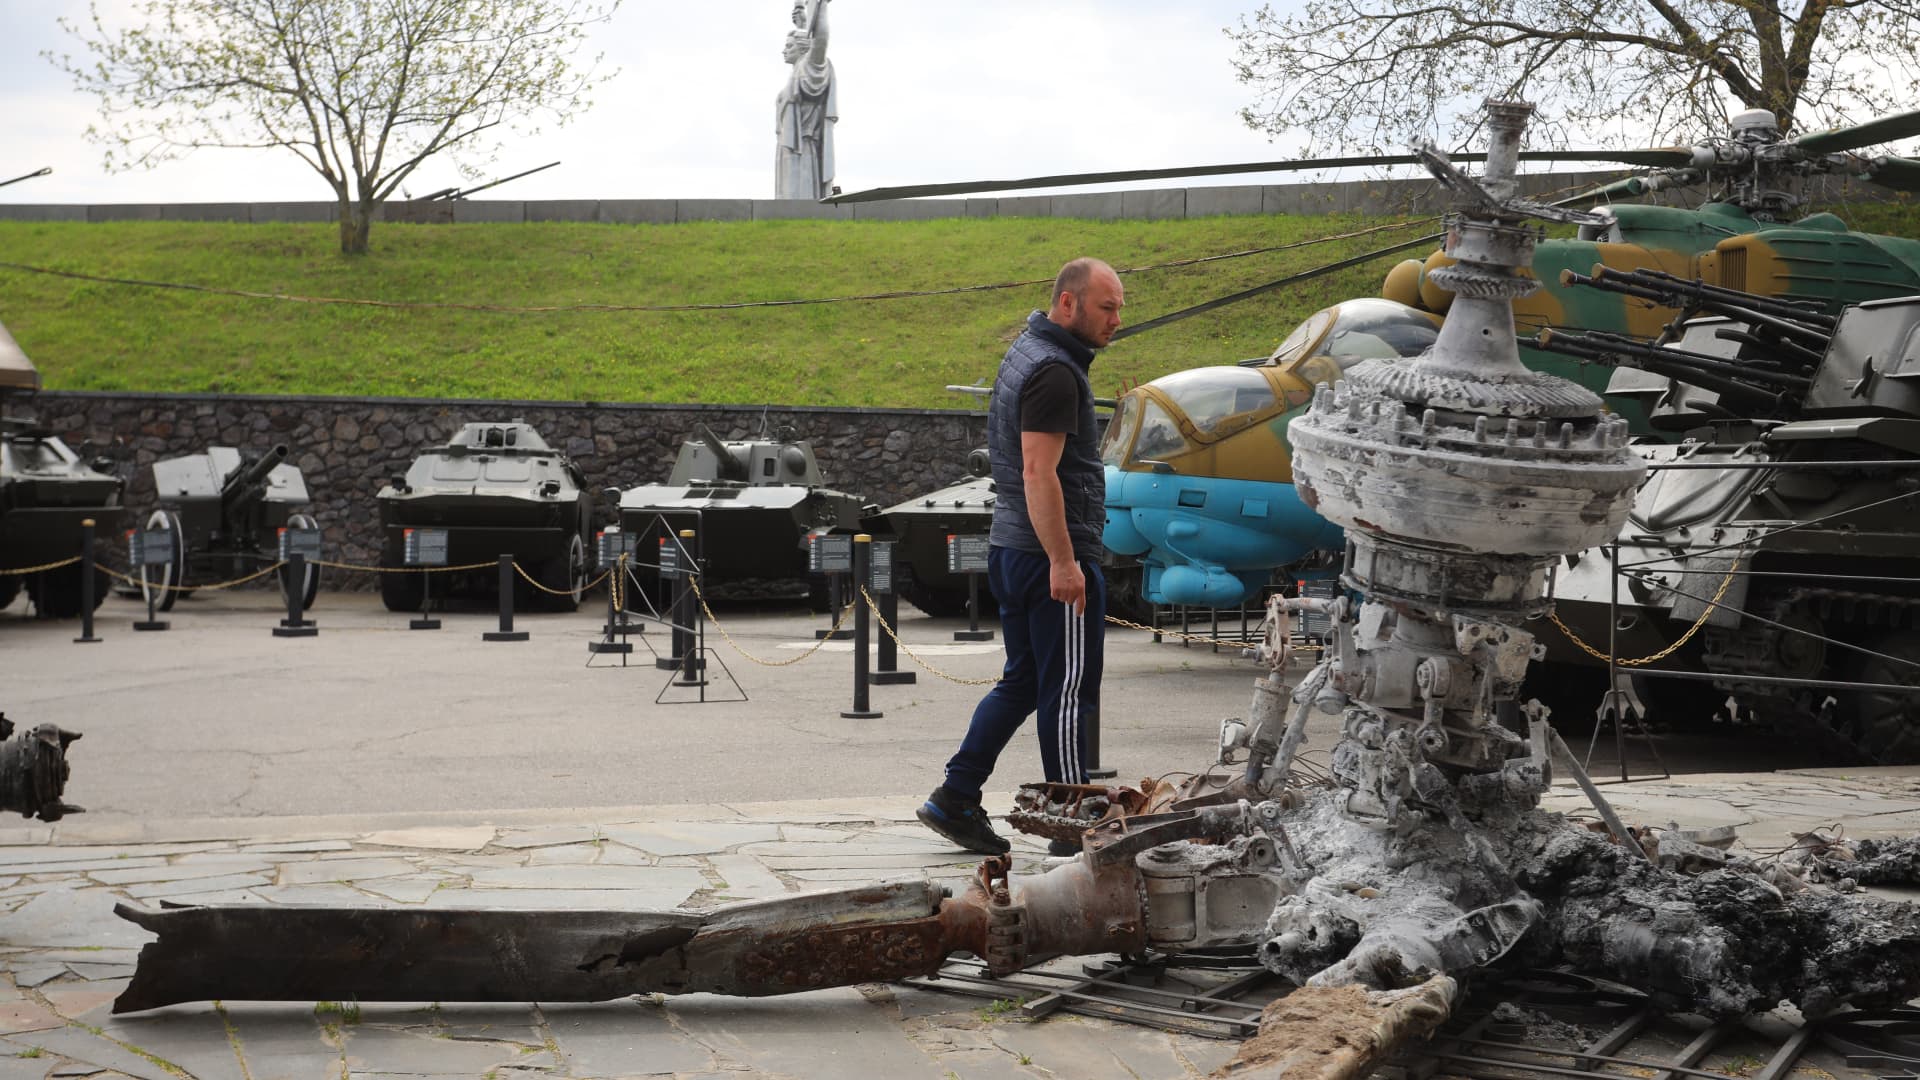 A man walks past a destroyed Russian helicopter from the recent Ukraine Russia conflict, at the World War II open-air museum in Kyiv on May 8, 2022, a day before 'Victory Day' is commemorated in Ukraine.